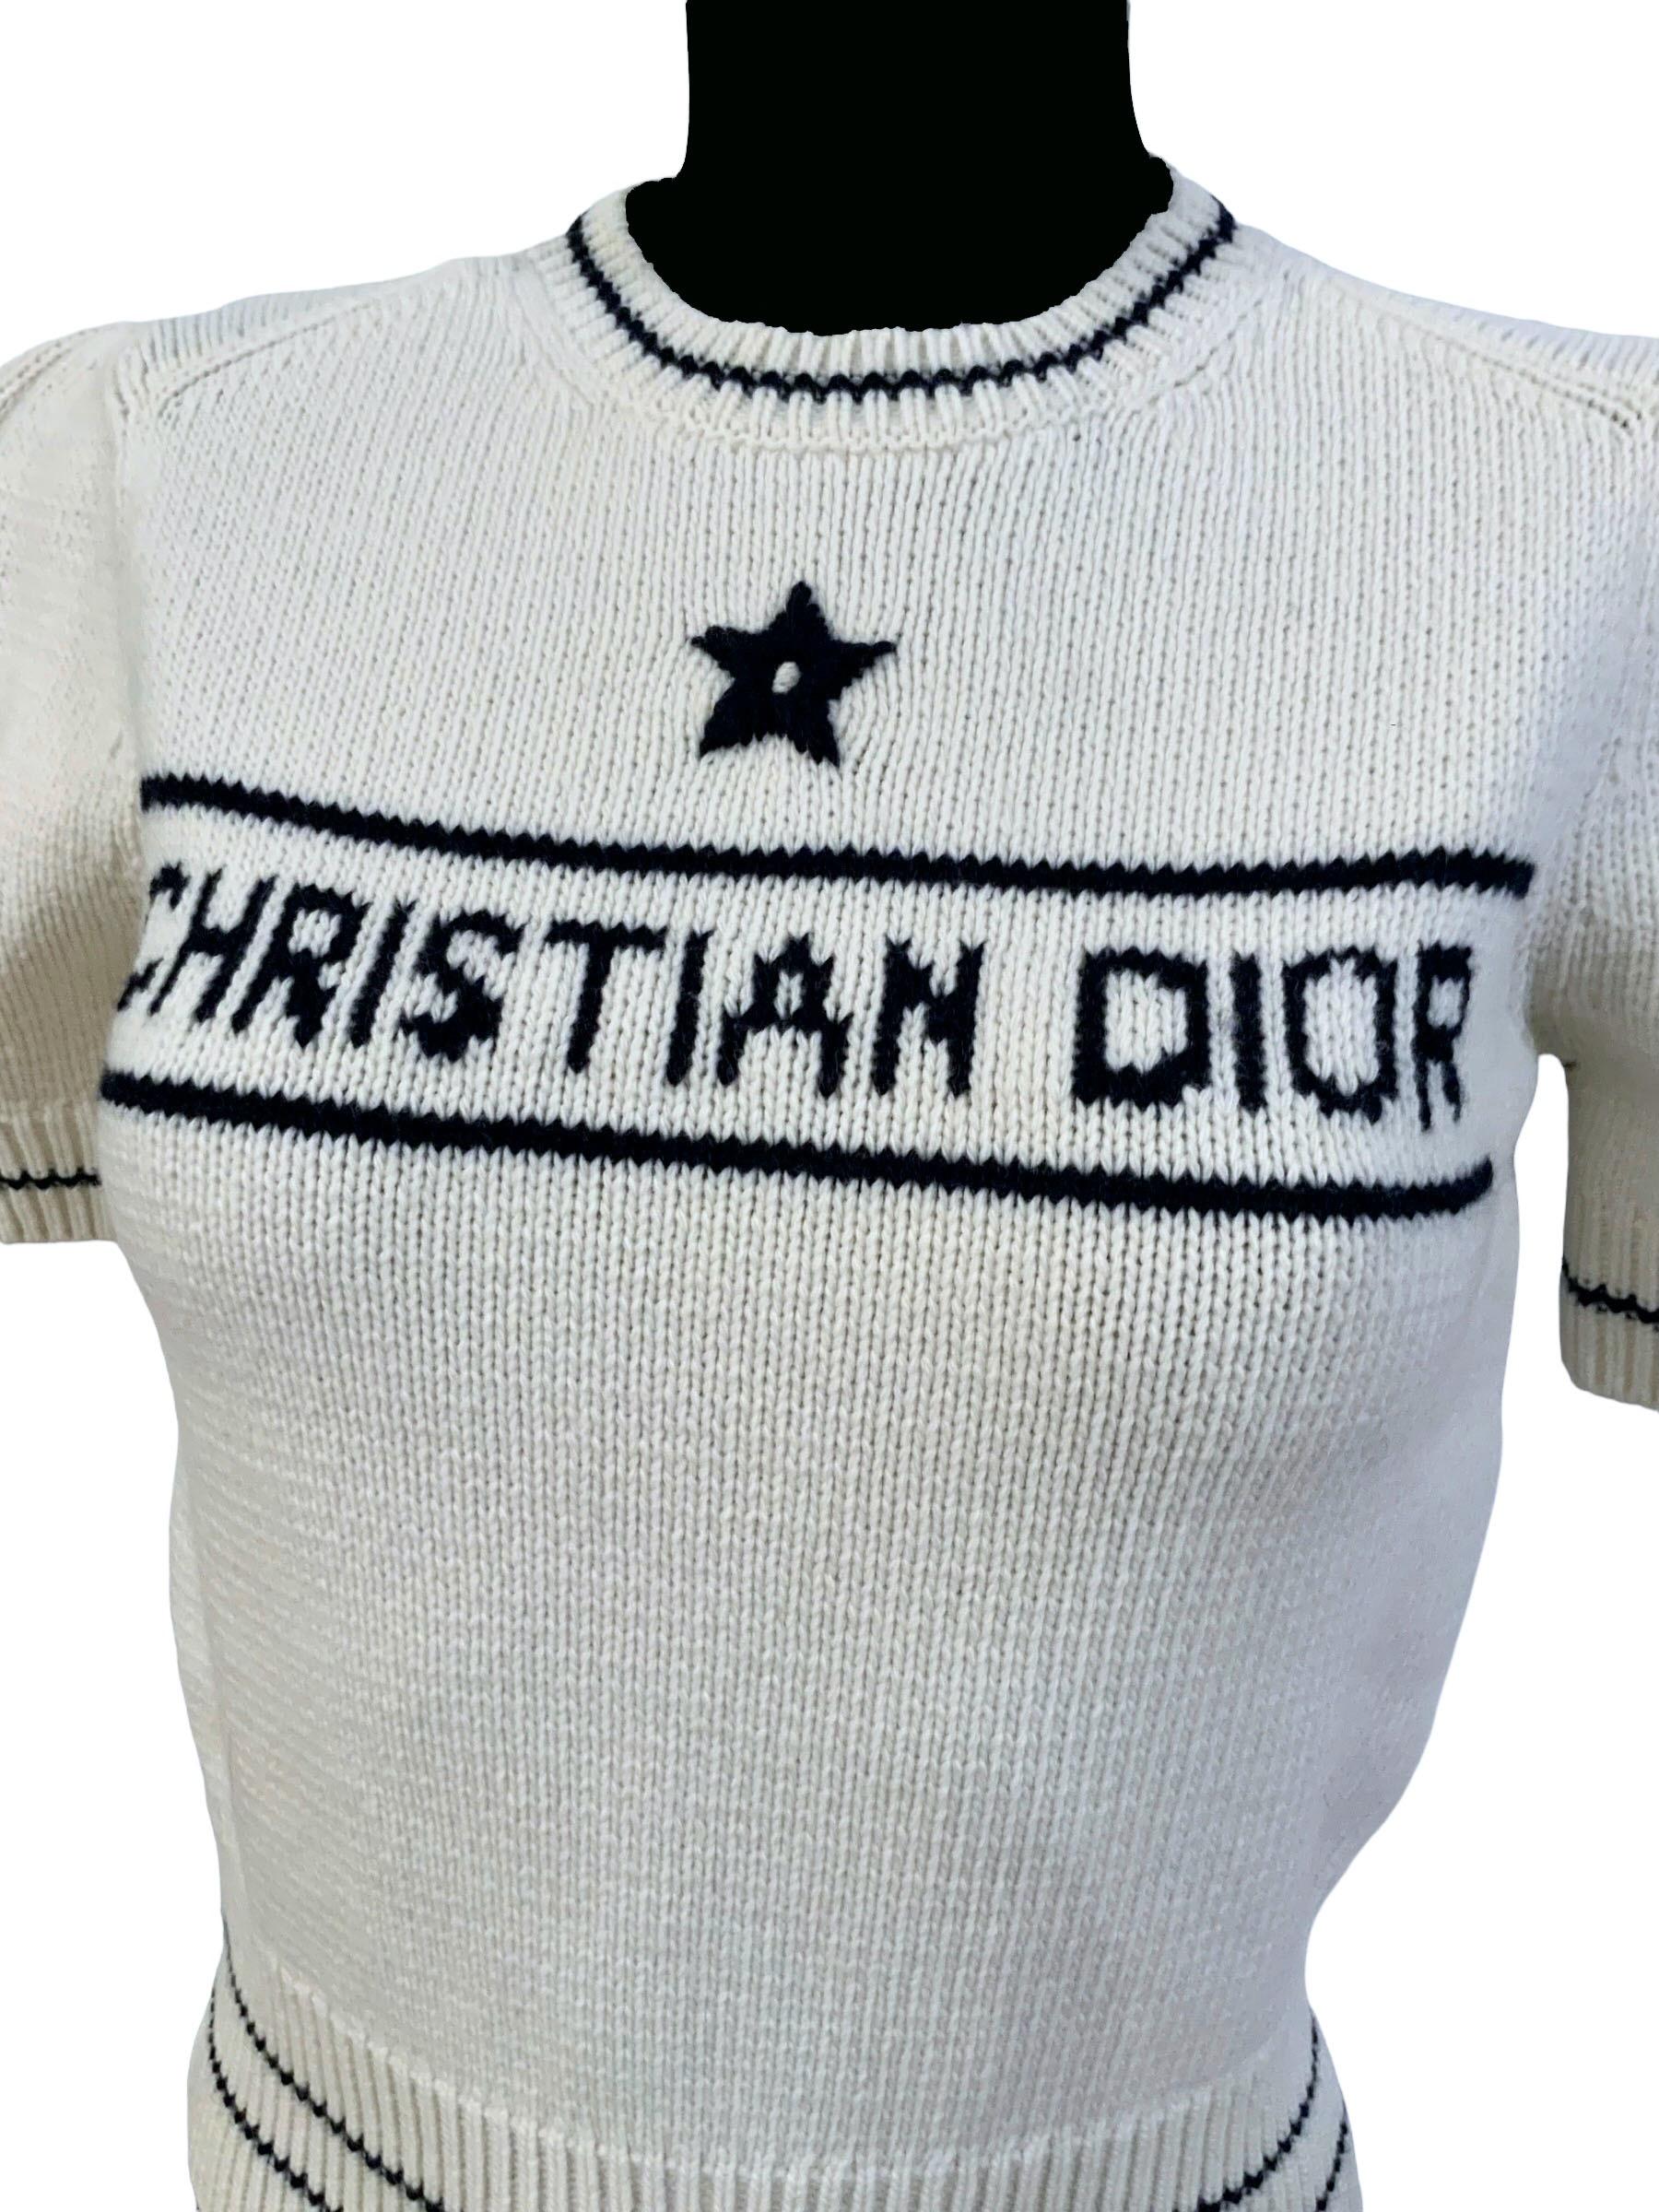 Women's Christian Dior Ecru Cashmere and Wool Knit Short - Sleeved Sweater